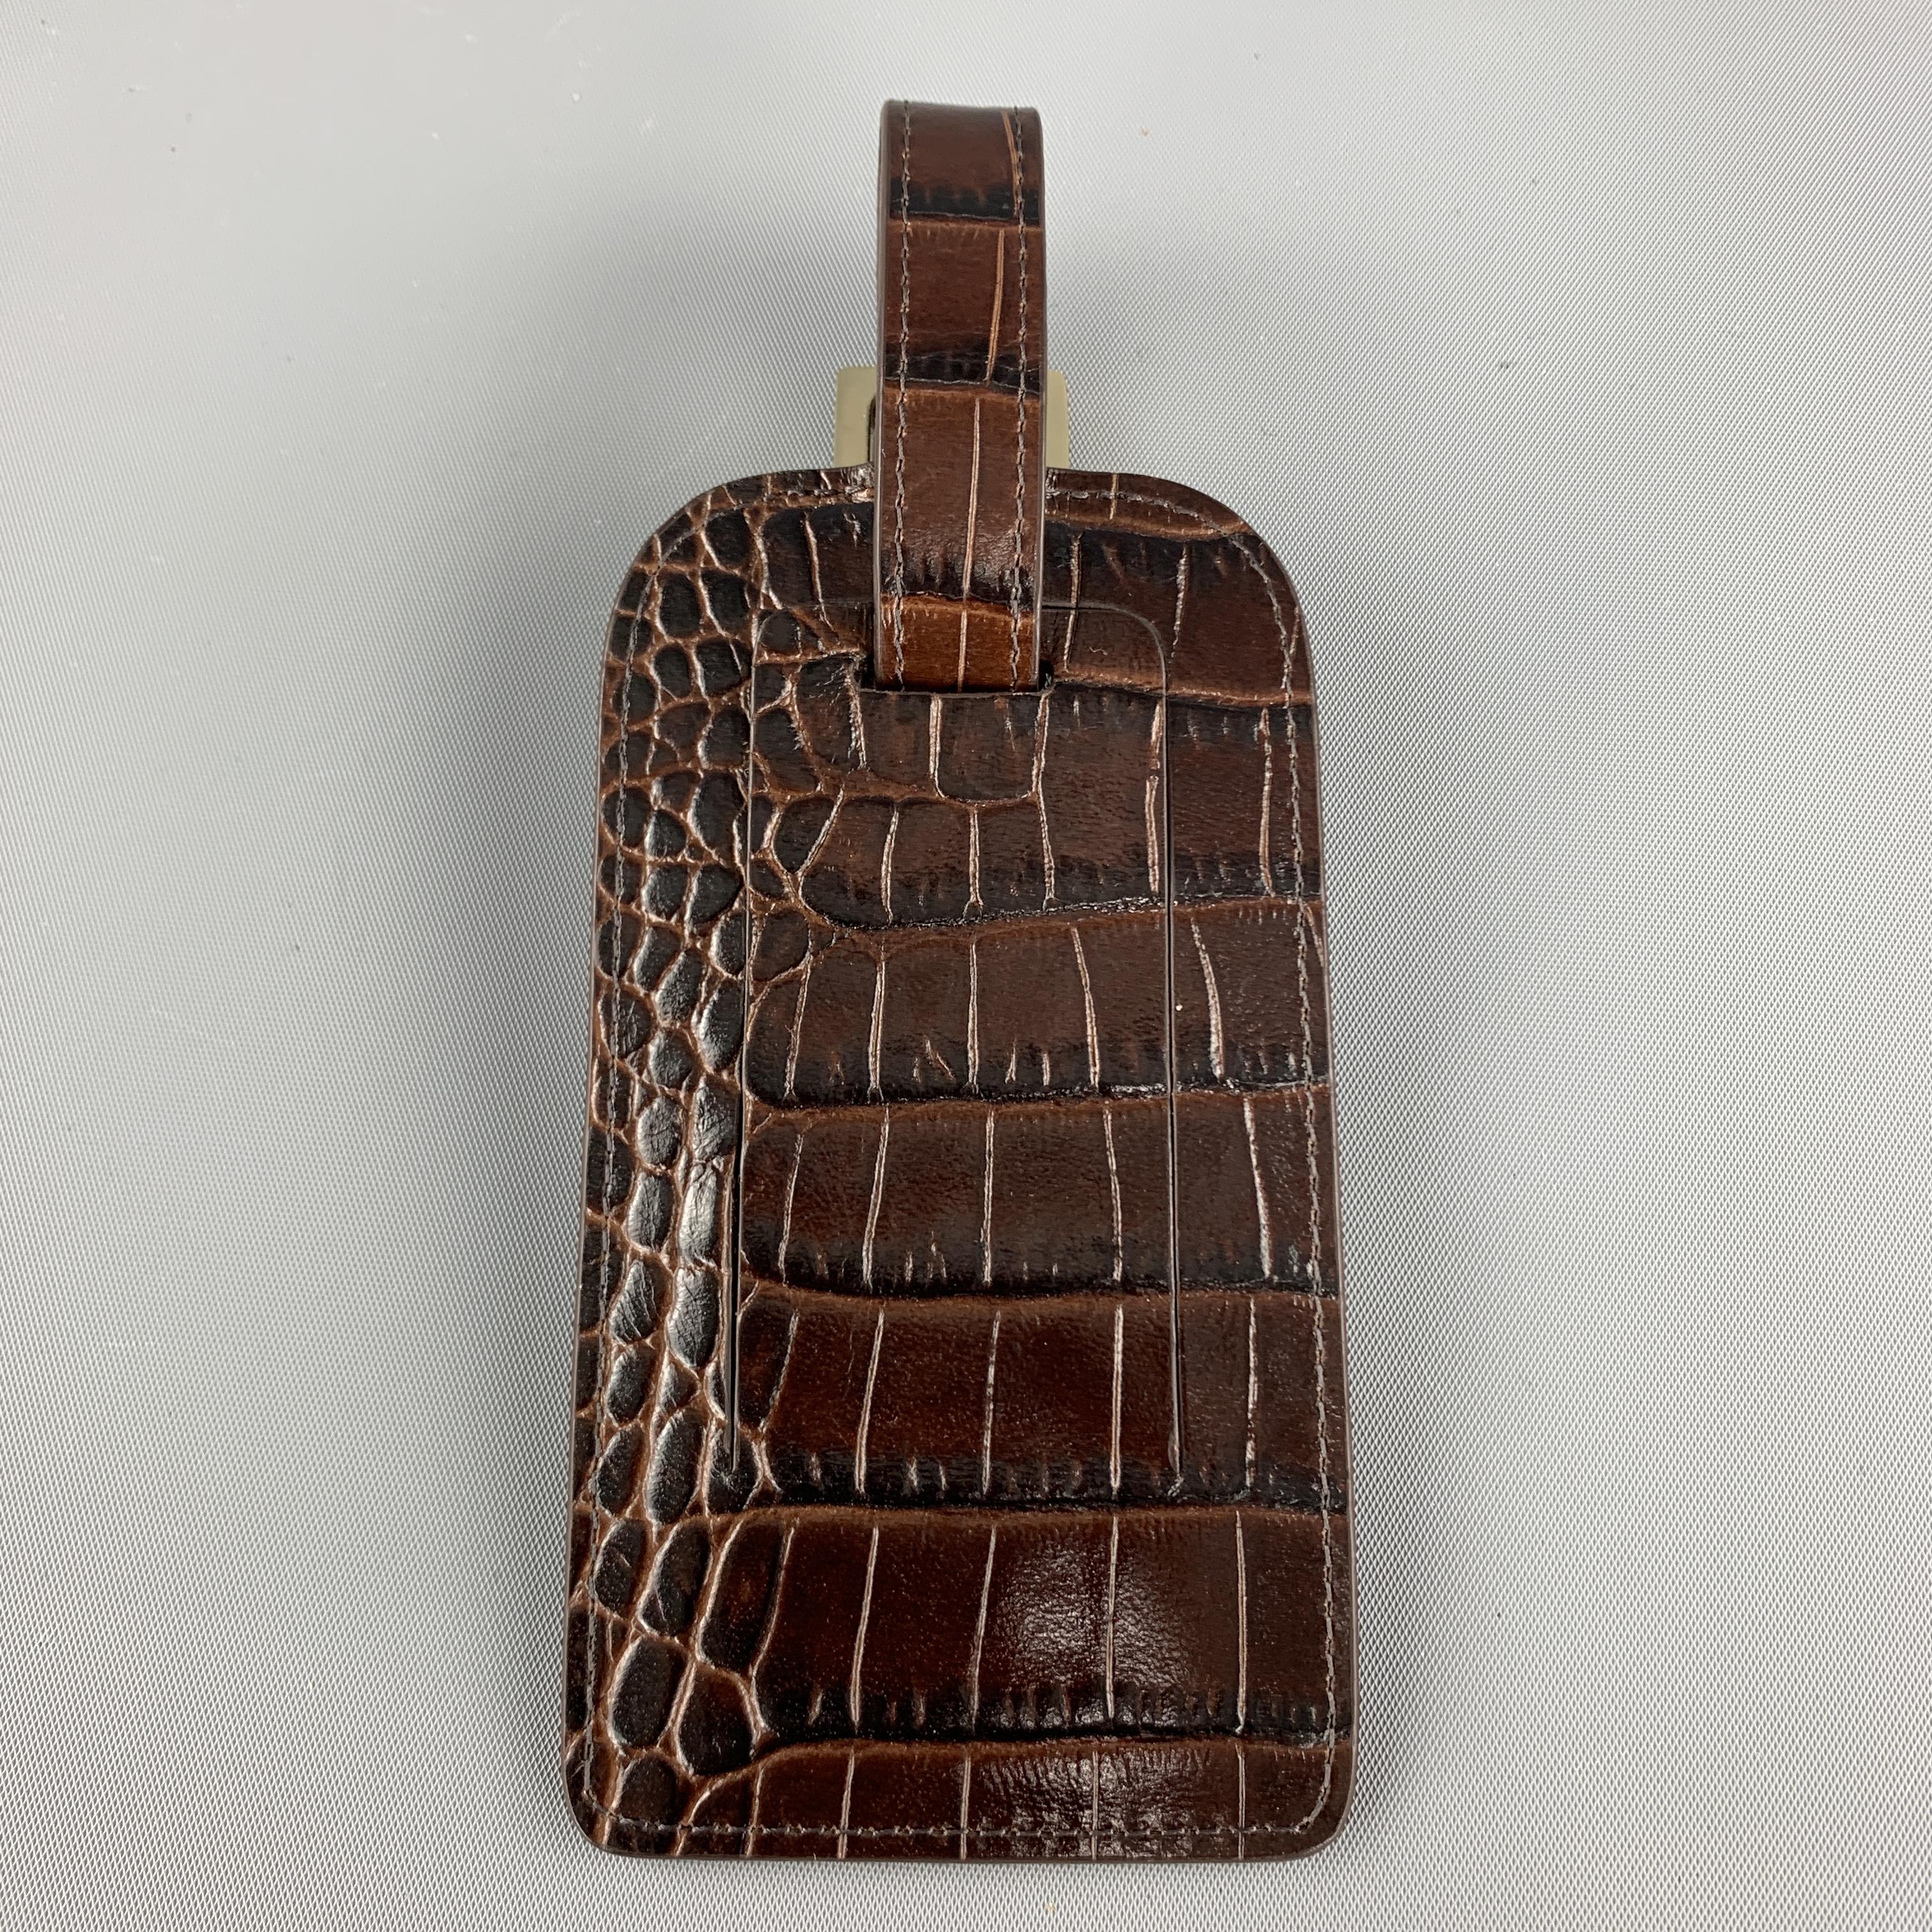 GUMP'S luggage tag comes in brown alligator embossed leather with a gold tone stamp and buckle. 

Excellent Pre-Owned Condition.

4.75 x 2.5 in.